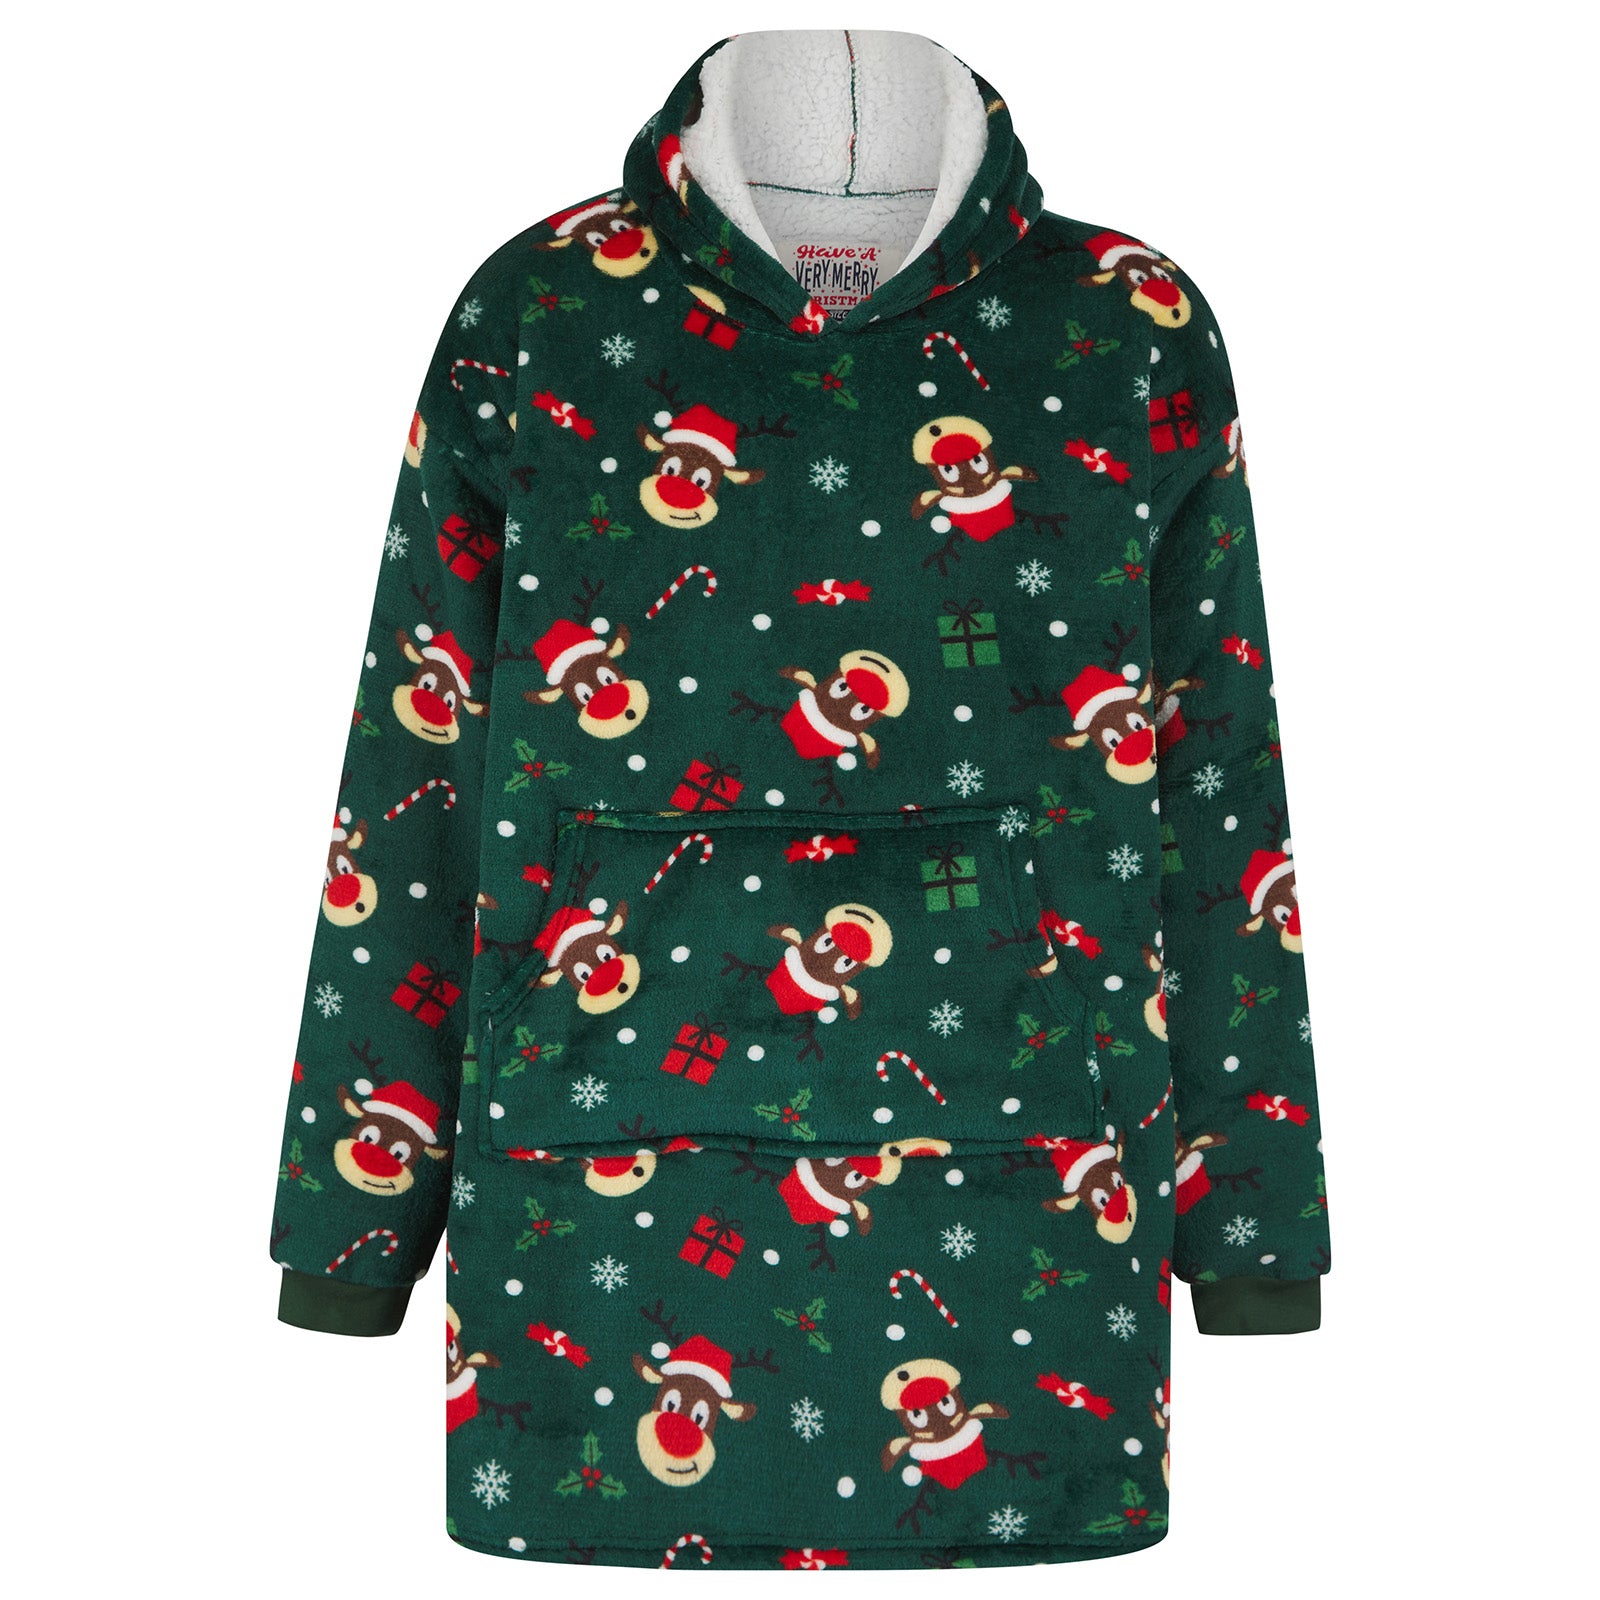 green oversized hoodie with reindeer and candy cane pattern with sherpa fleece lining